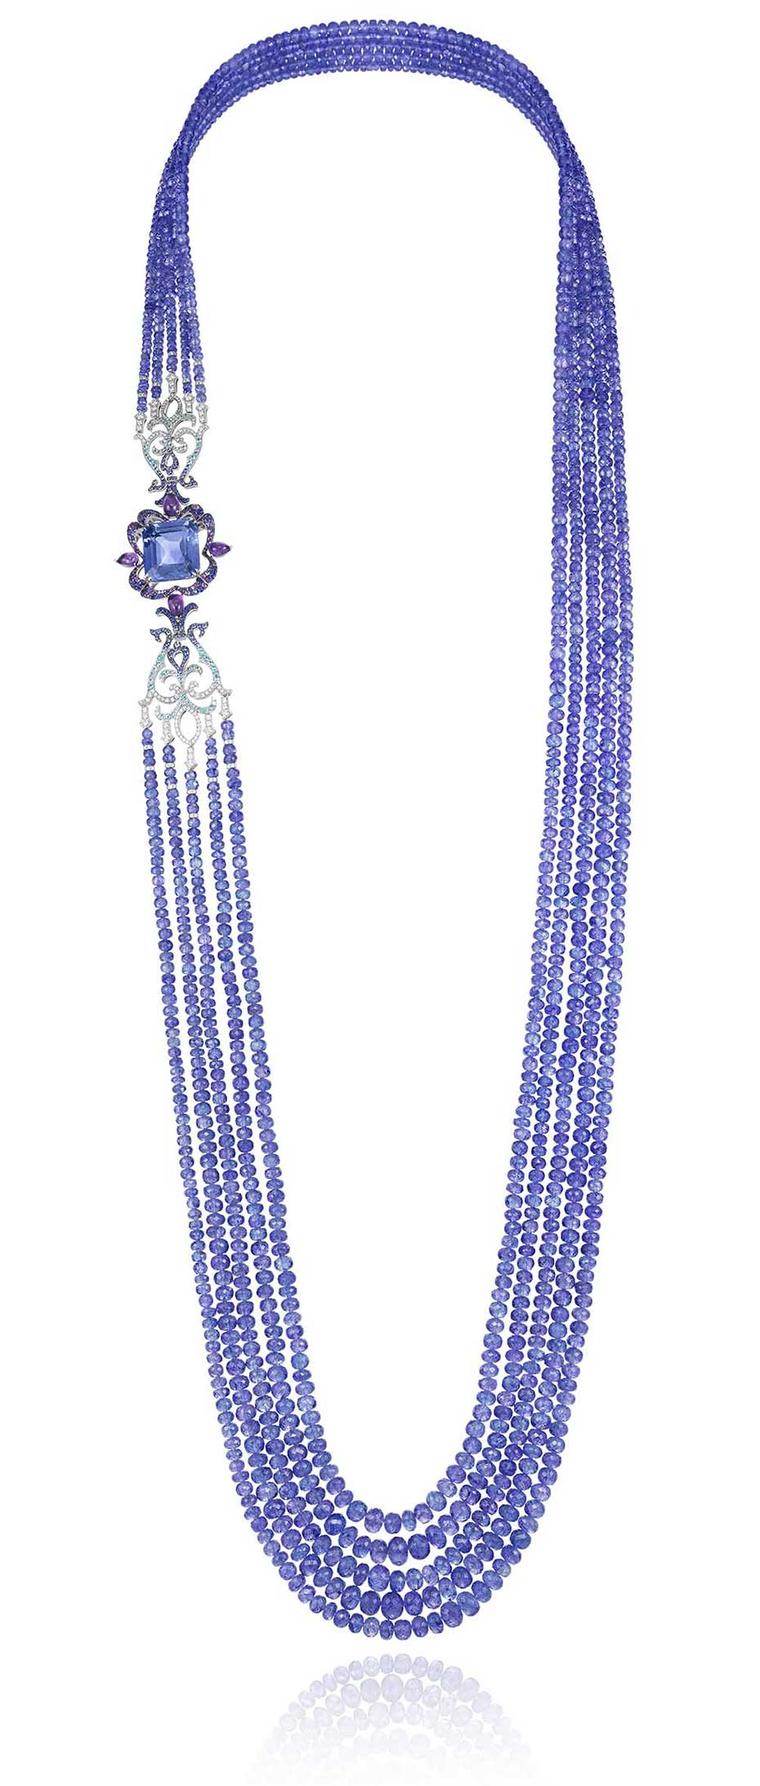 Chopard Temptations necklace featuring tanzanite beads, diamonds, sapphires and amethysts all set in white gold.